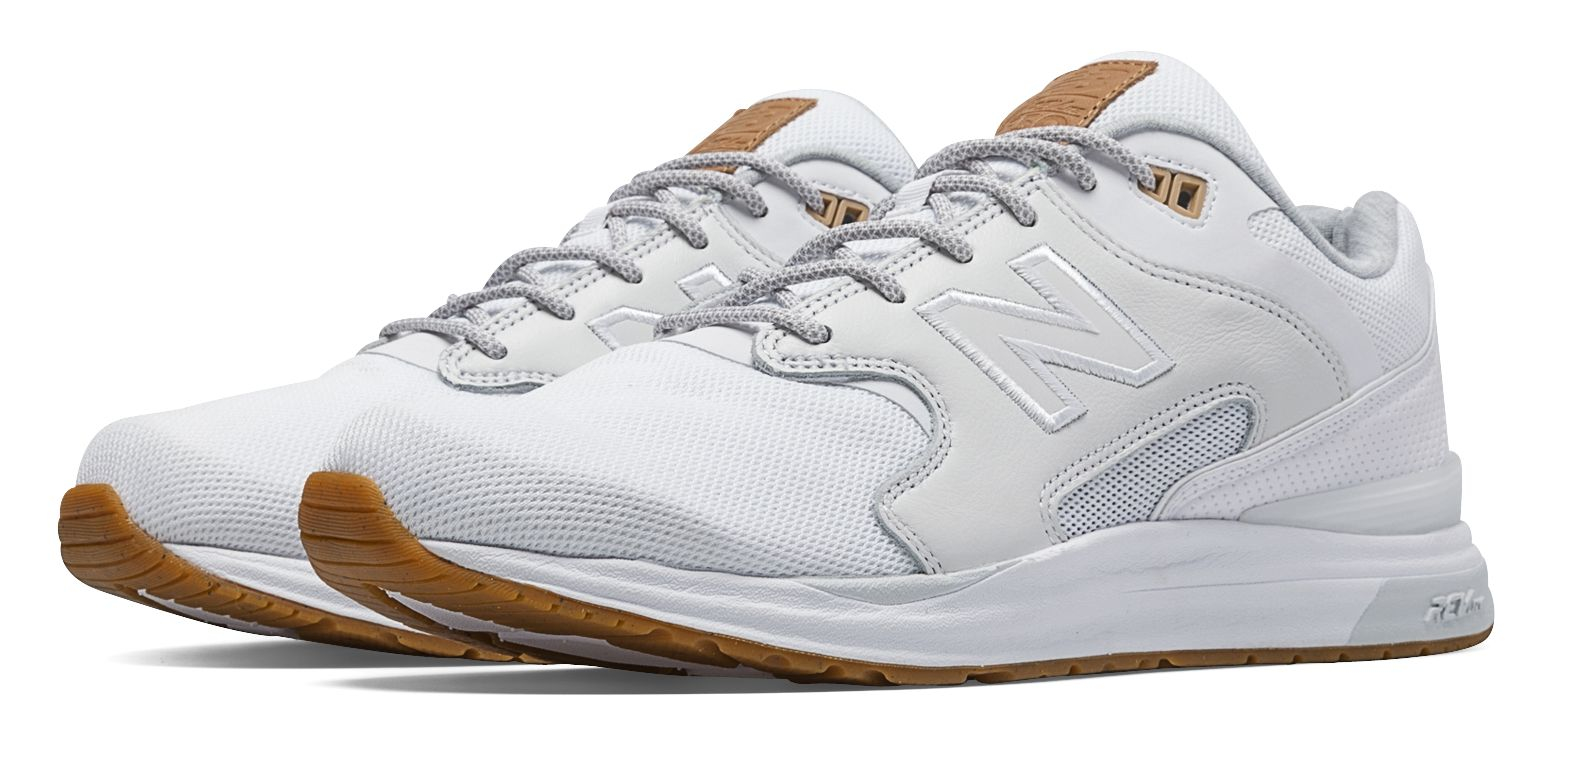 New Balance Synthetic 1550 Revlite in 